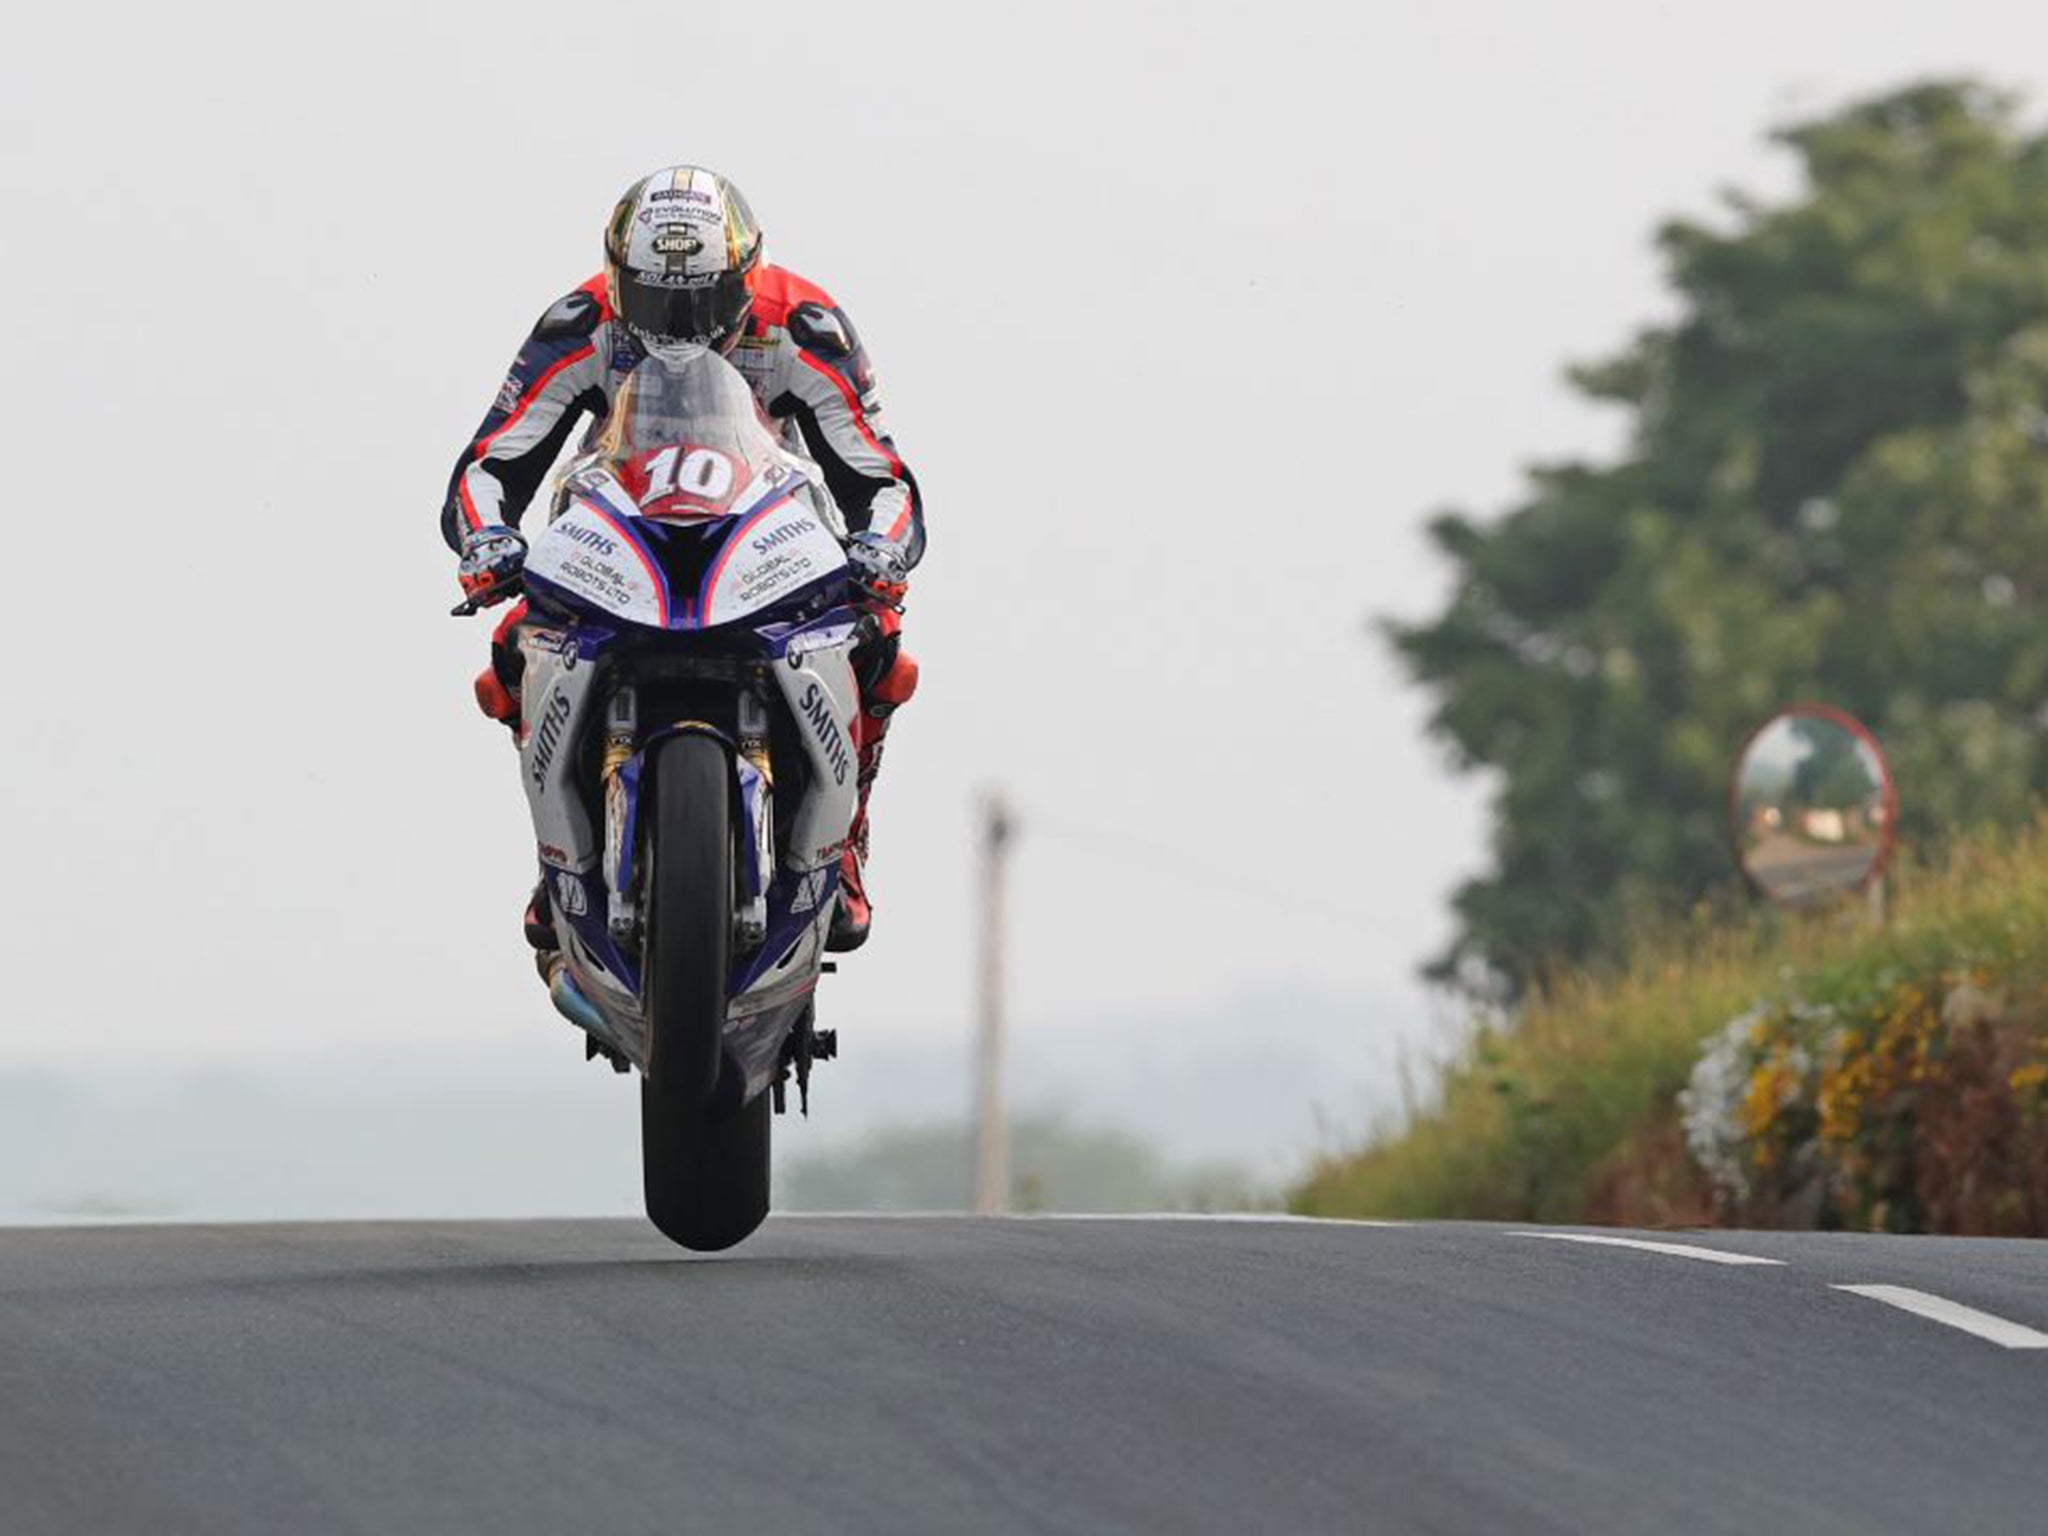 Isle of Man TT 2018 results Peter Hickman clinches his first ever win after incredible Superstock victory The Independent The Independent